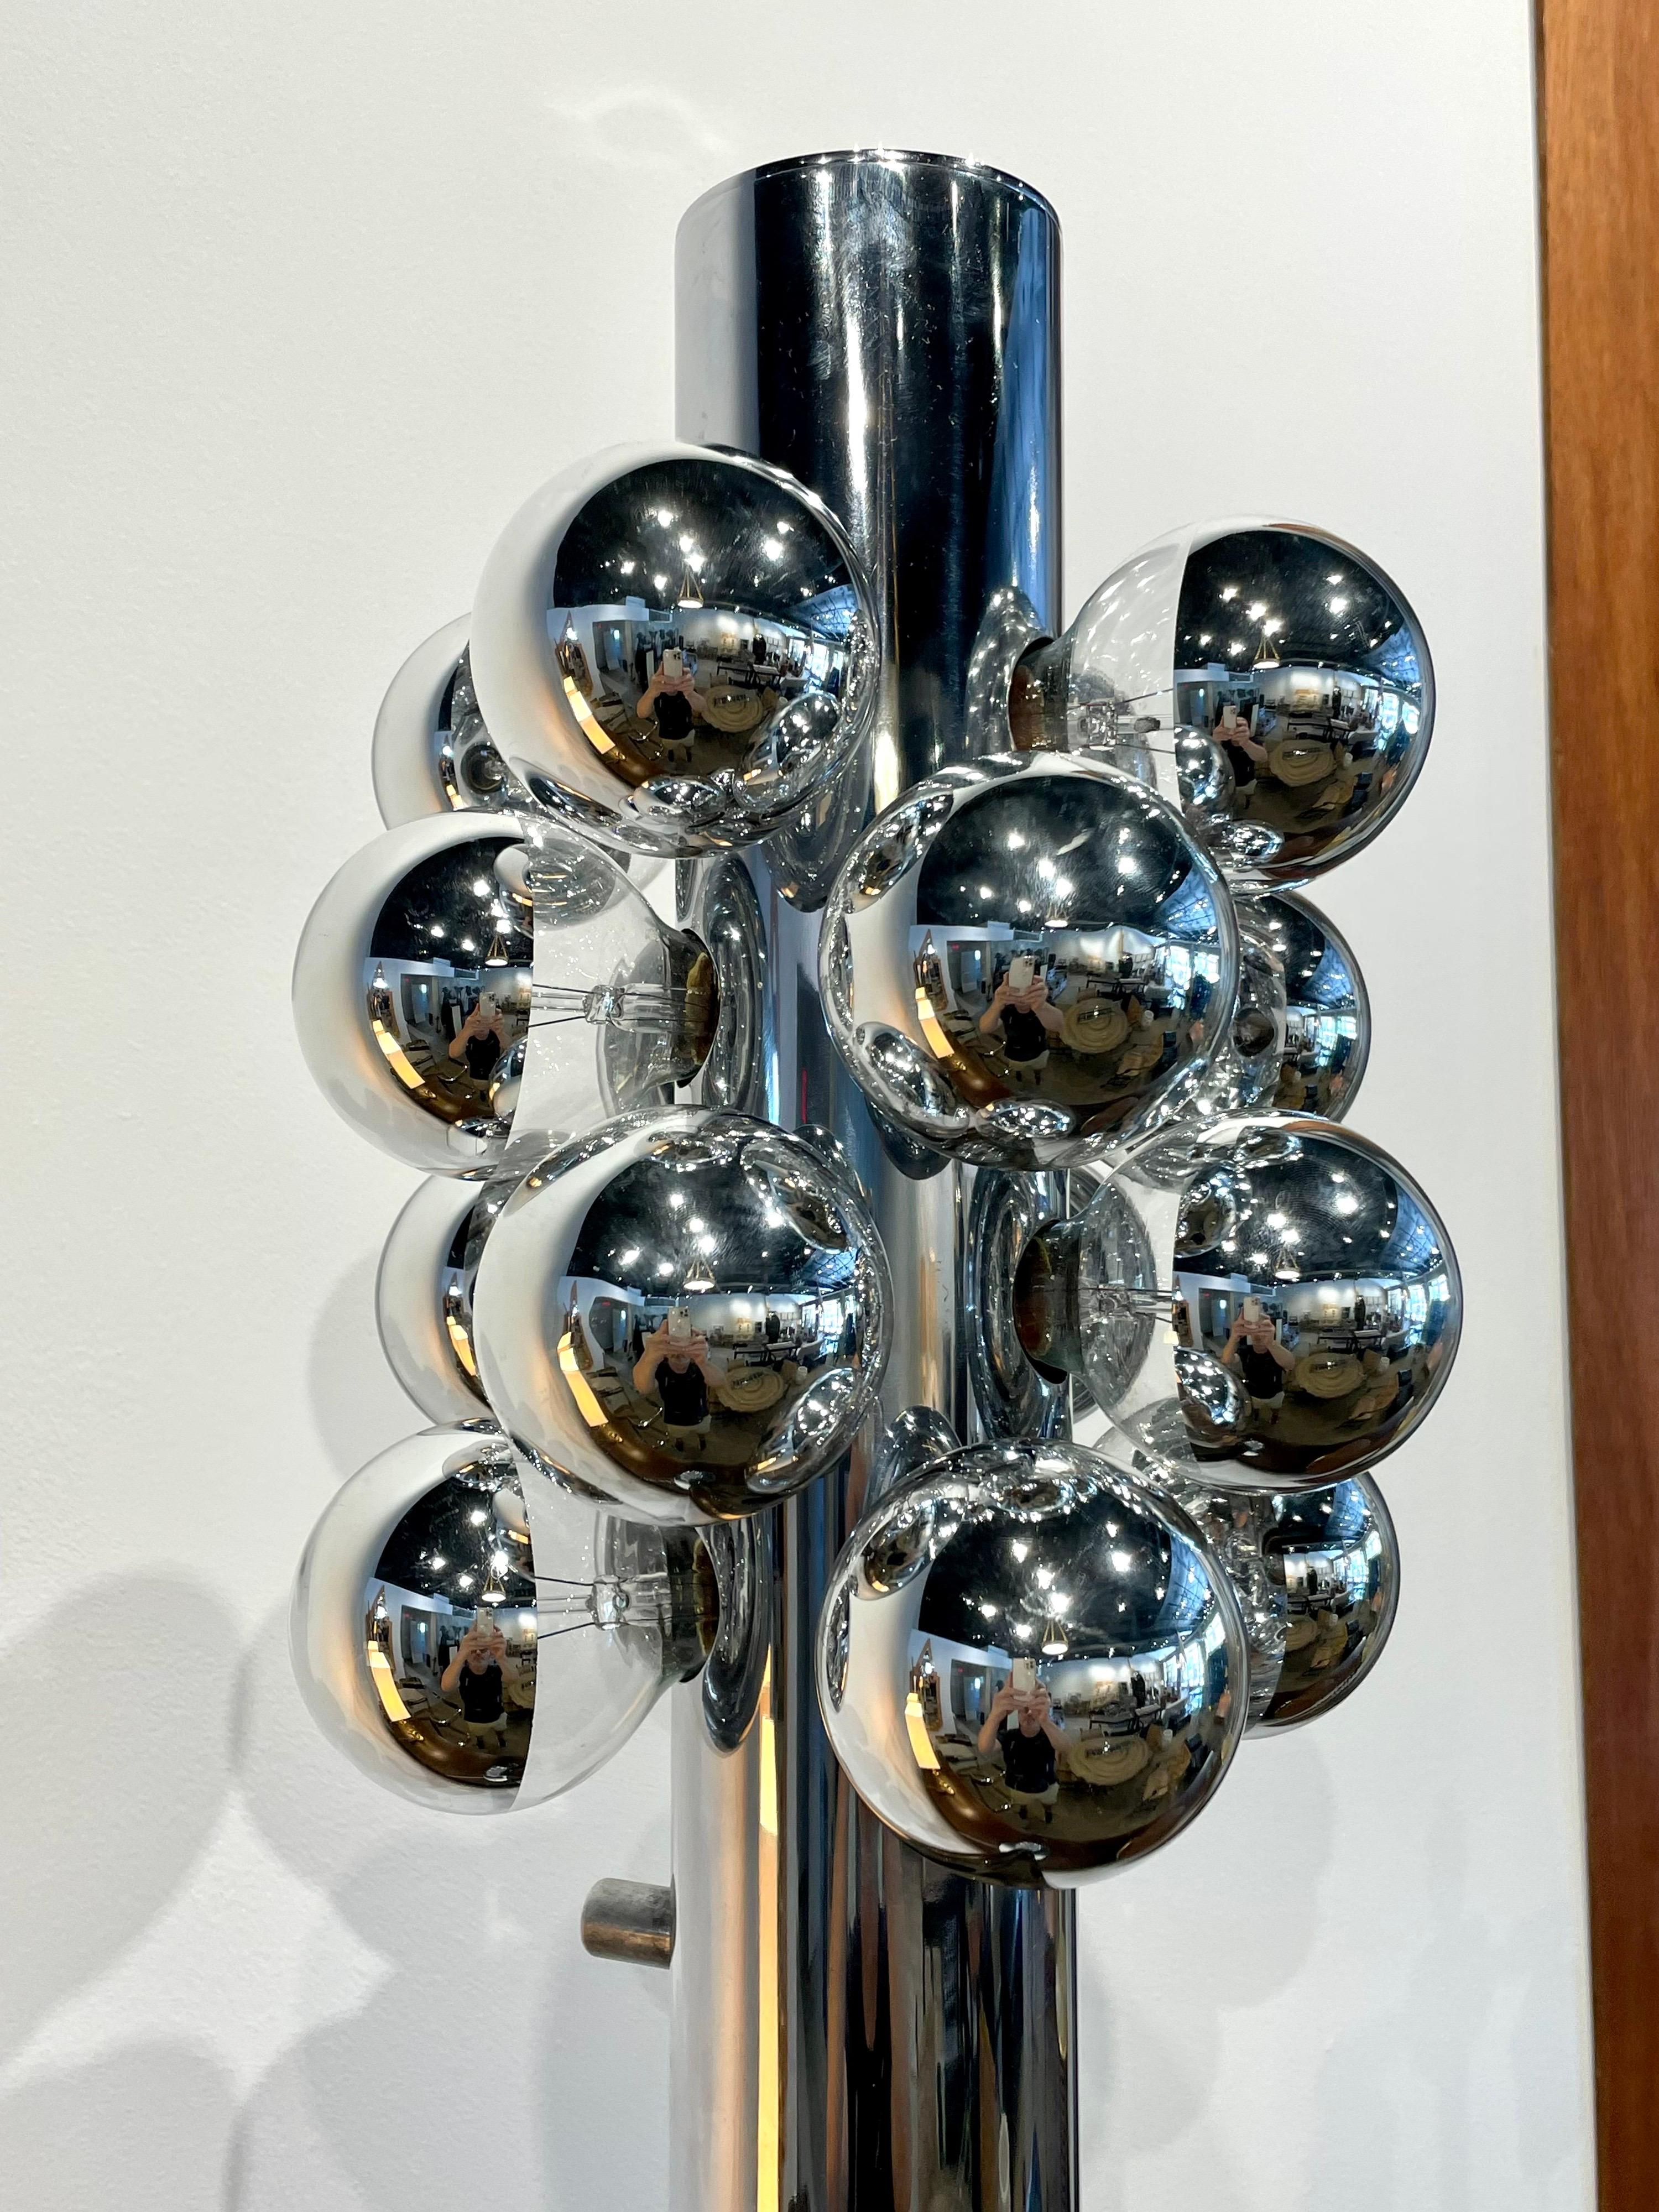 Italian chromed steel floor lamp is an original decorative lamp realized by Goffredo Reggiani in the 1970s. Illuminated by a cluster of chrome tipped light bulbs, this is a wonderful stylish lamp.